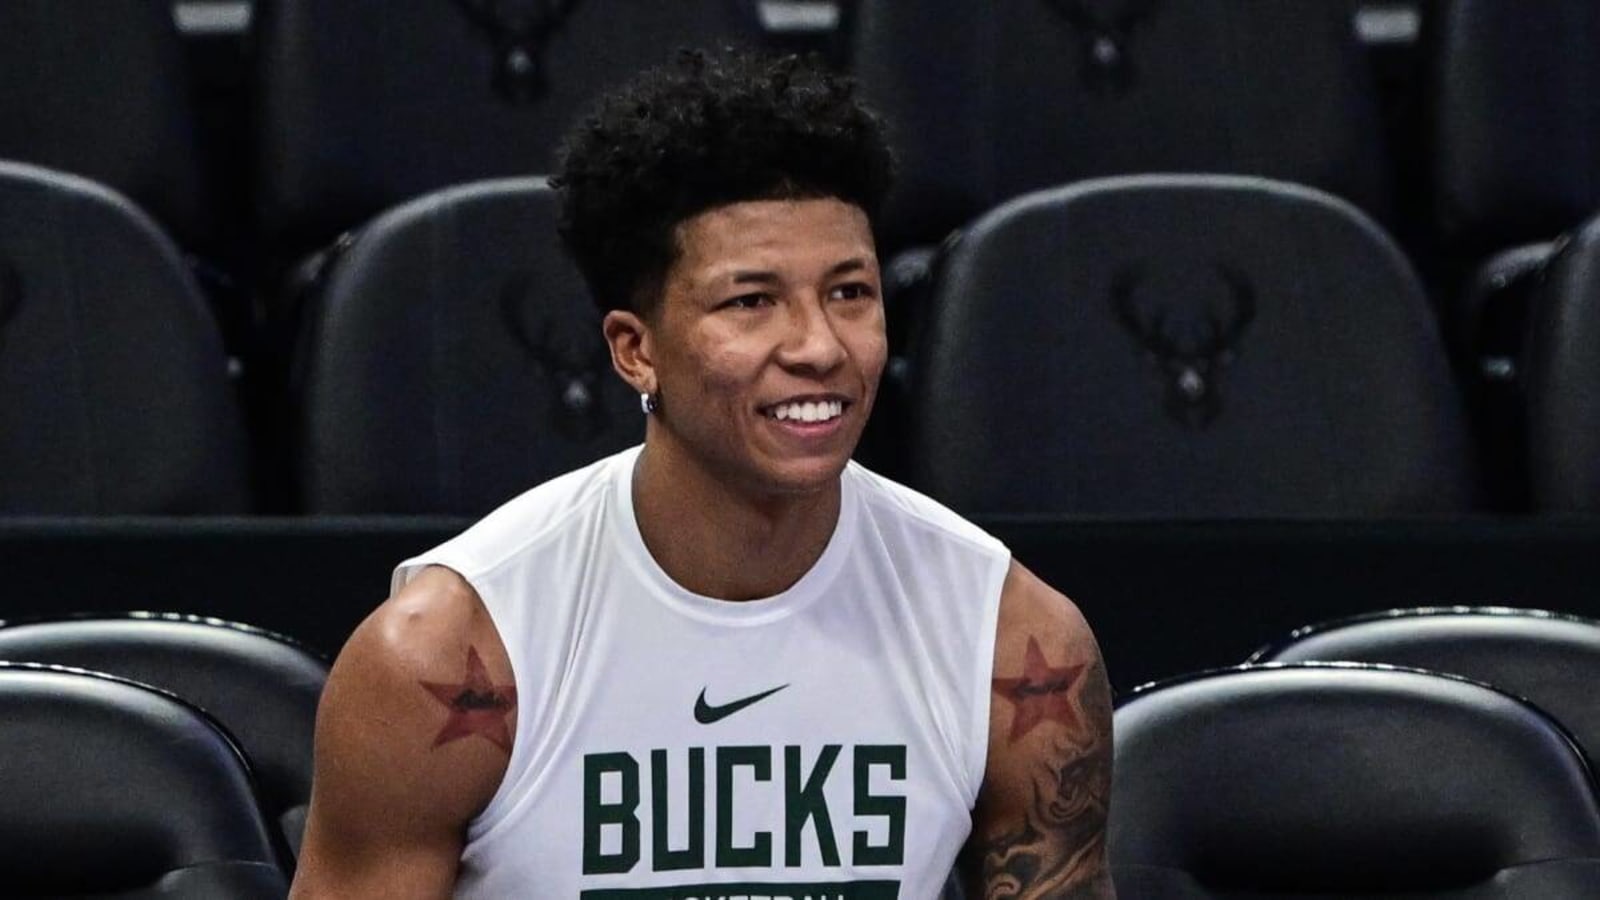 The Milwaukee Bucks are off to a 2-0 start in NBA Summer League